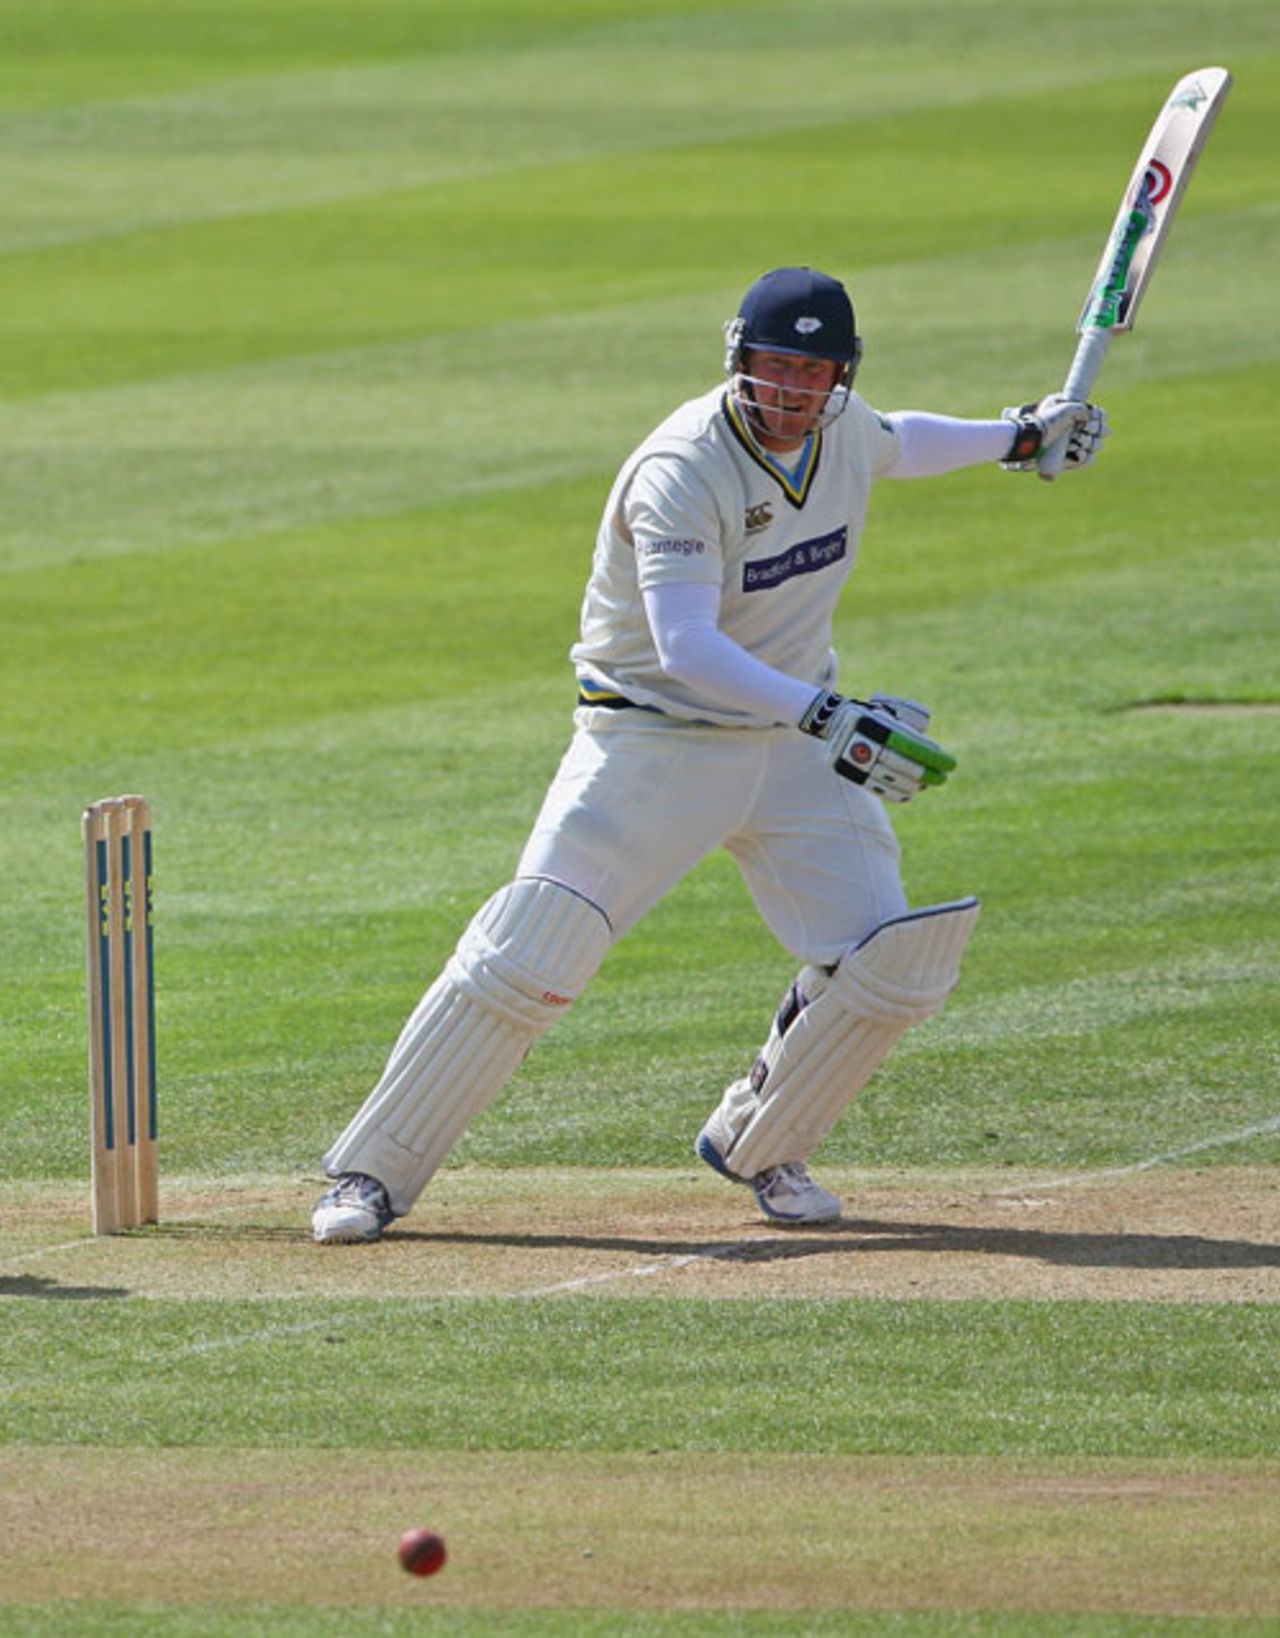 Anthony McGrath on his way to a double hundred with a one-handed drive, Warwickshire v Yorkshire, County Championship Division One, Edgbaston, May 7, 2009